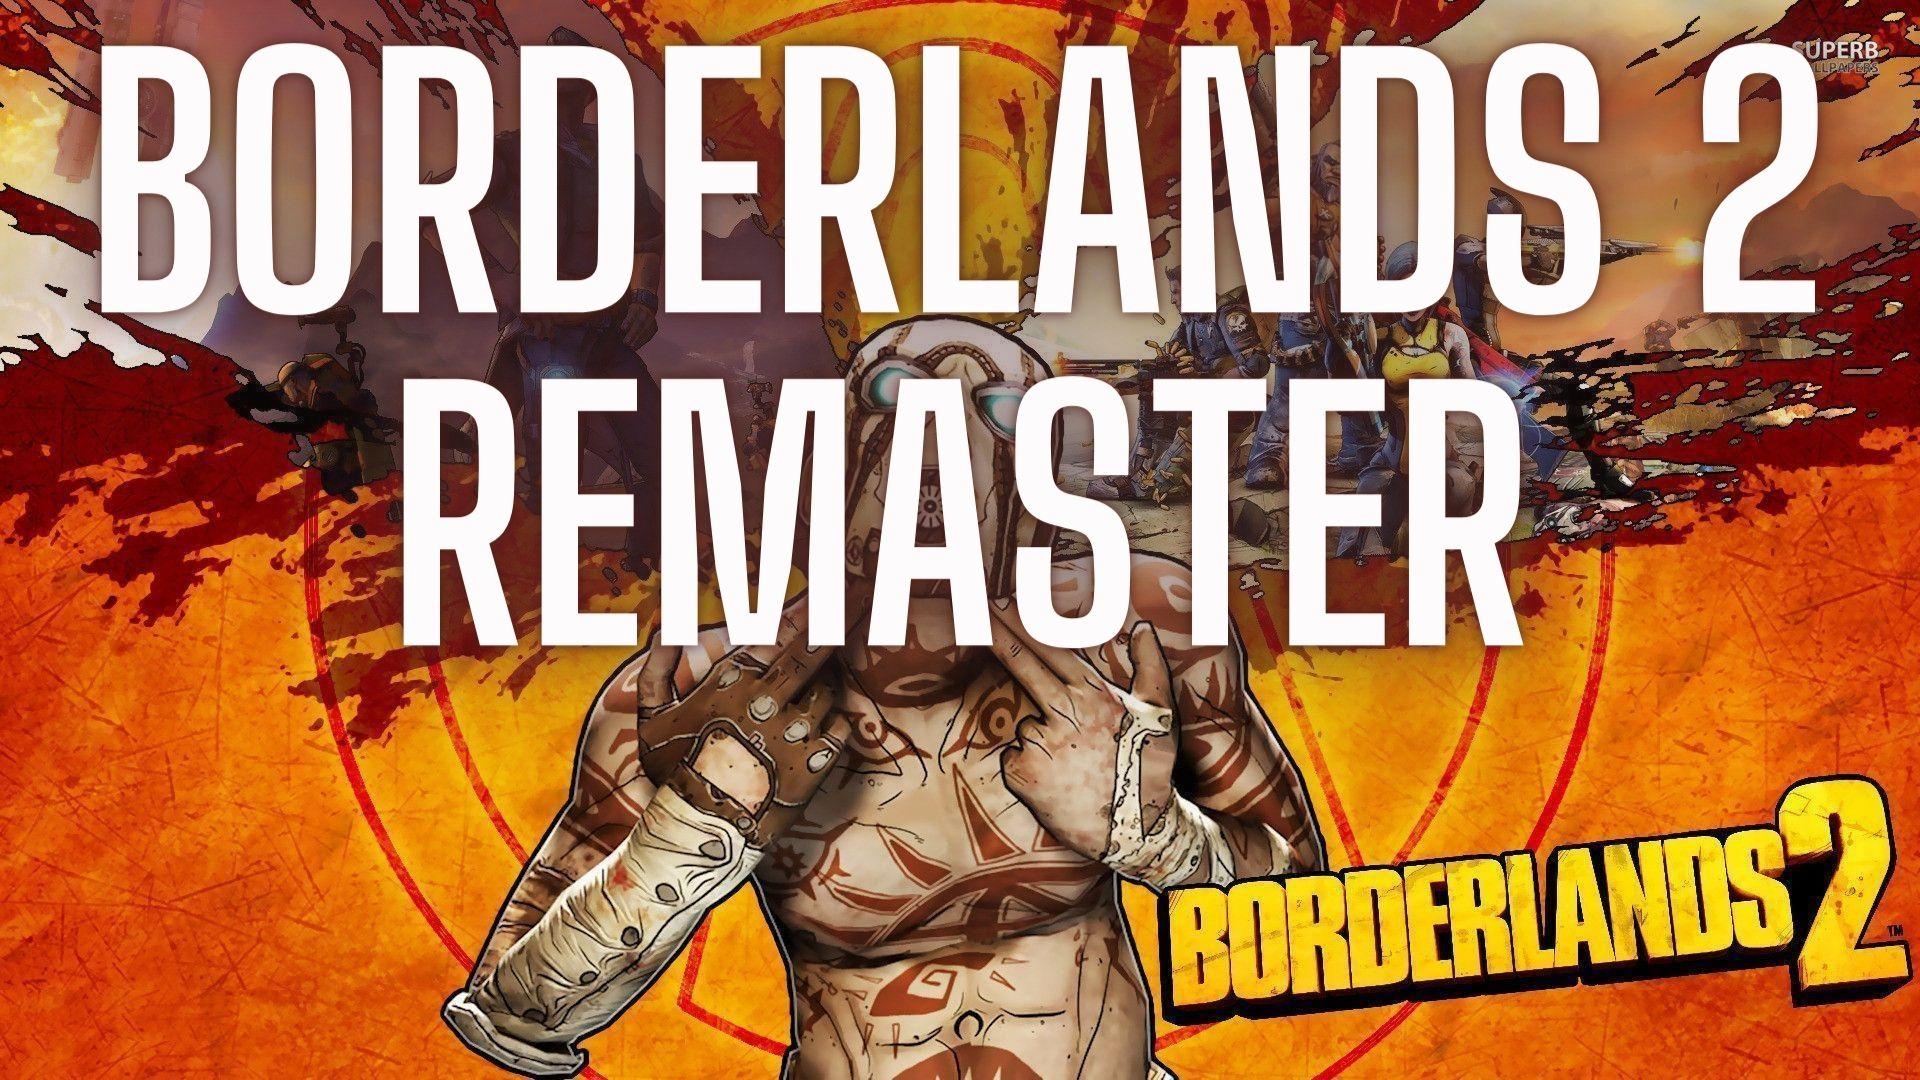 Borderlands 2 Remaster Concept The Perfect Borderlands Game Fantasy Booking Guides News